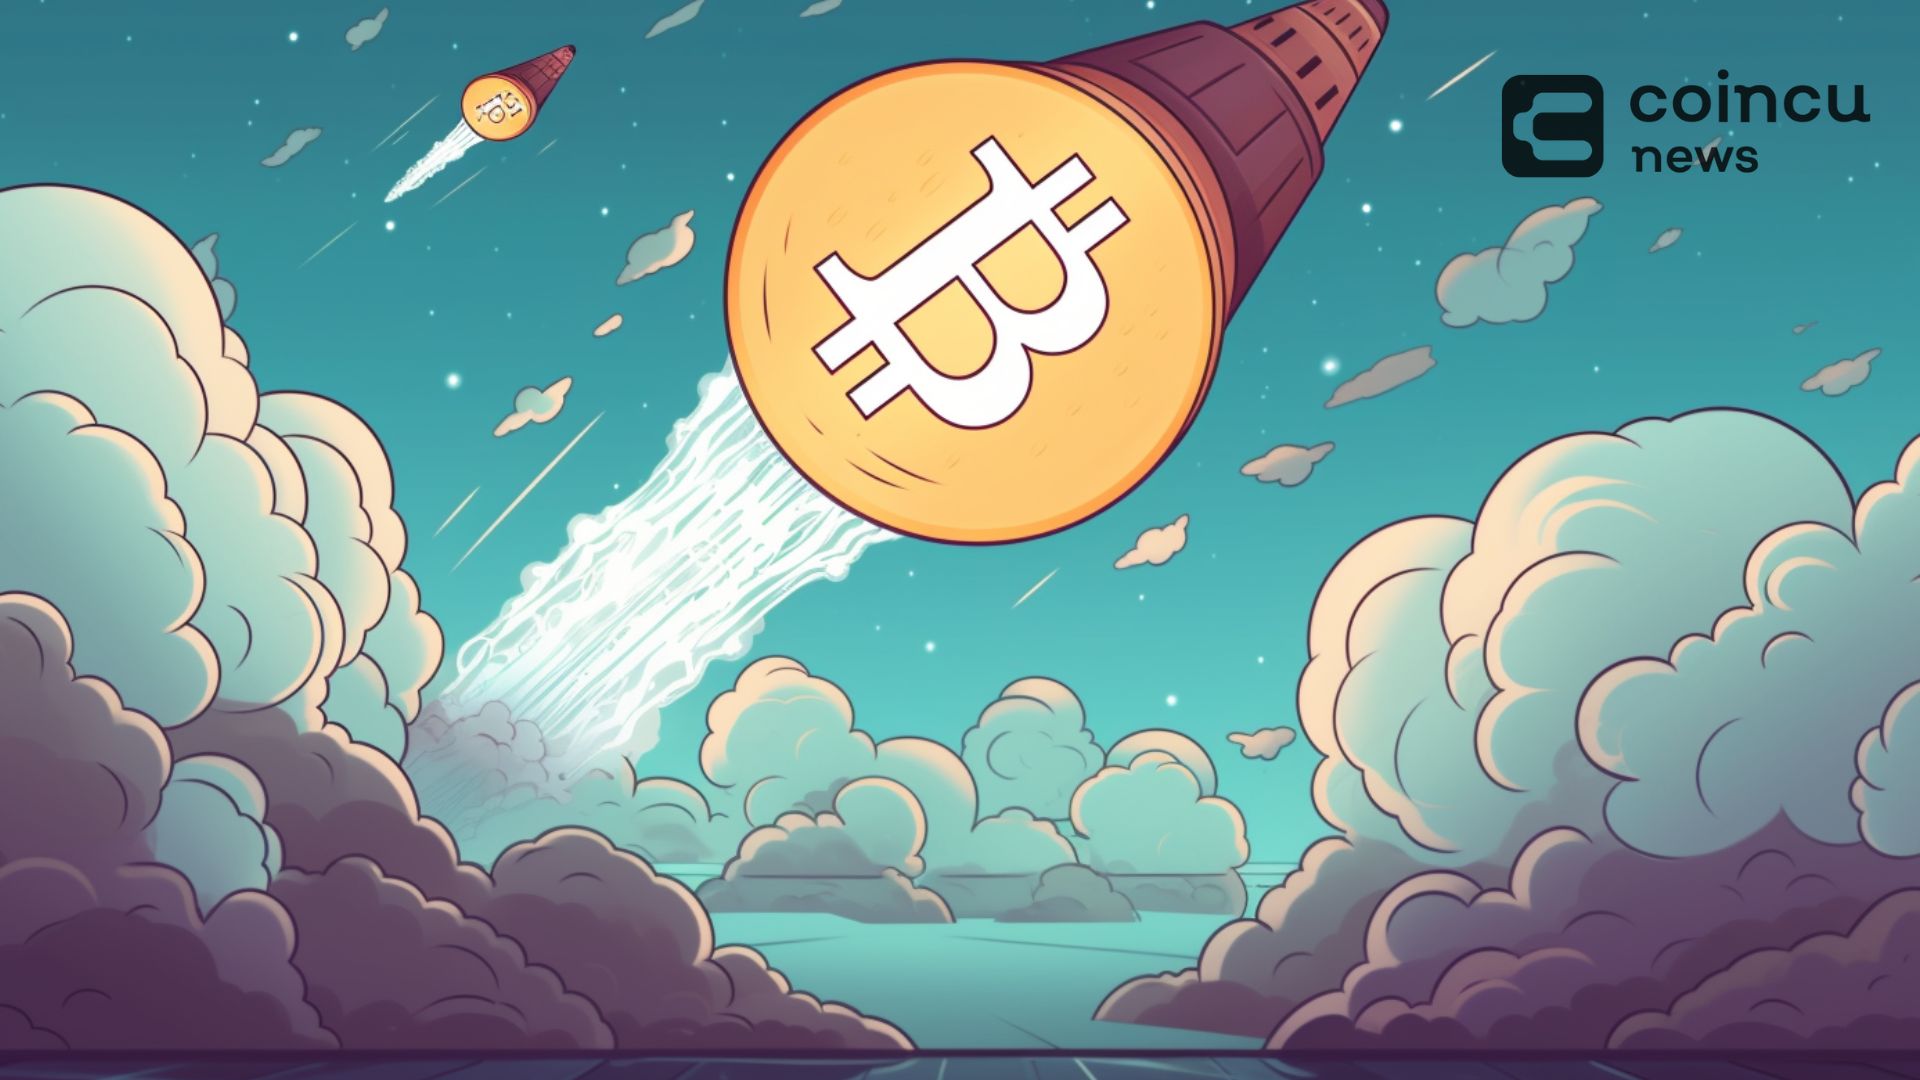 Bitcoin Market Cap Hit $1 Trillion: Market Recovery Or Short-lived Rally?